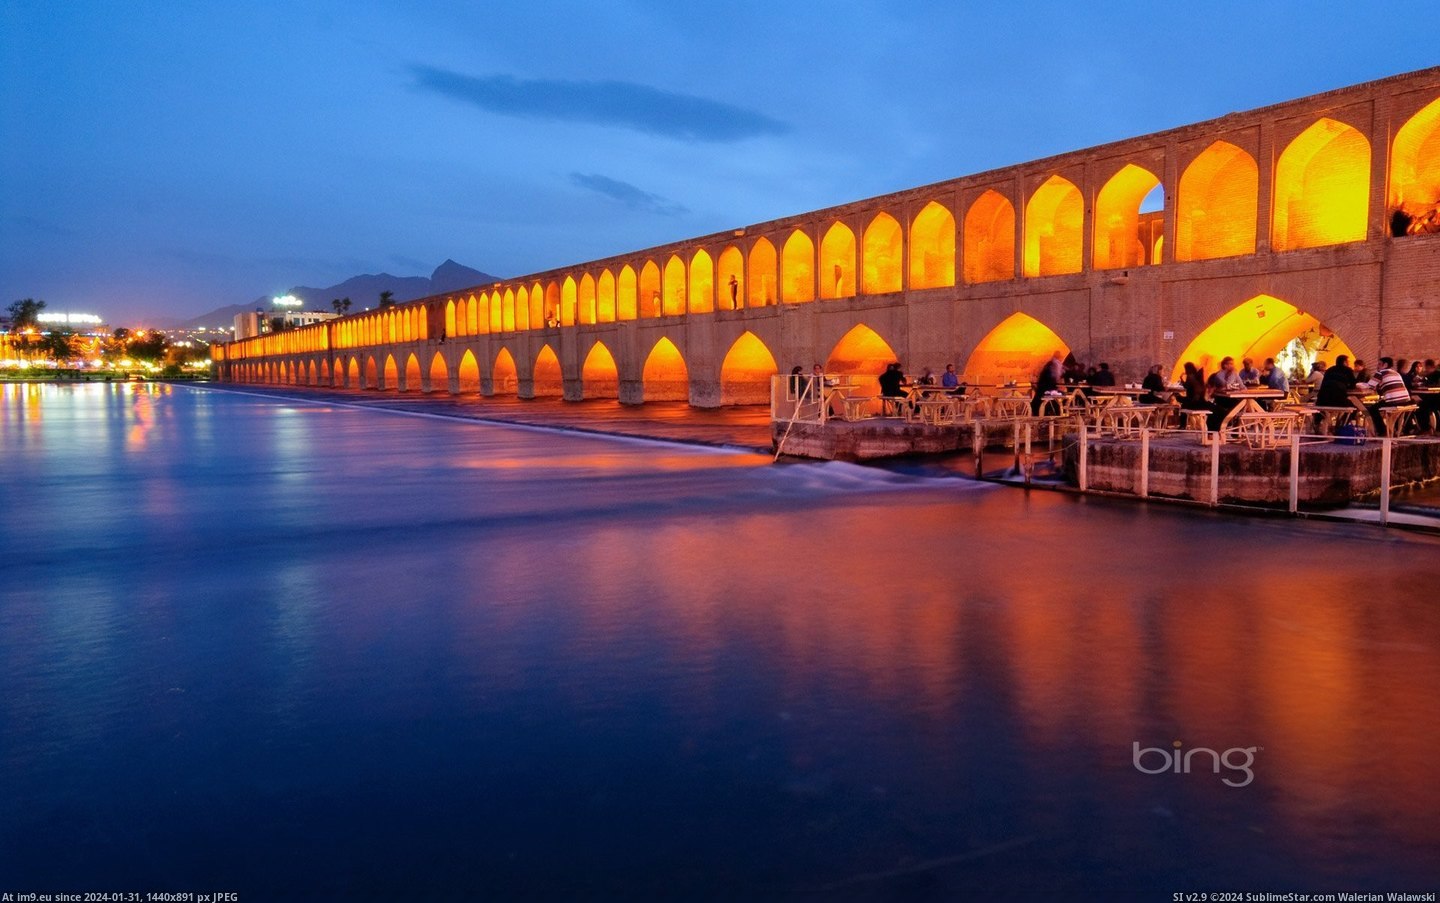 The Si-o-seh Bridge, Esfahan, Iran (Thompson Photography - Getty Images) 2013-03-20 (in Best photos of March 2013)